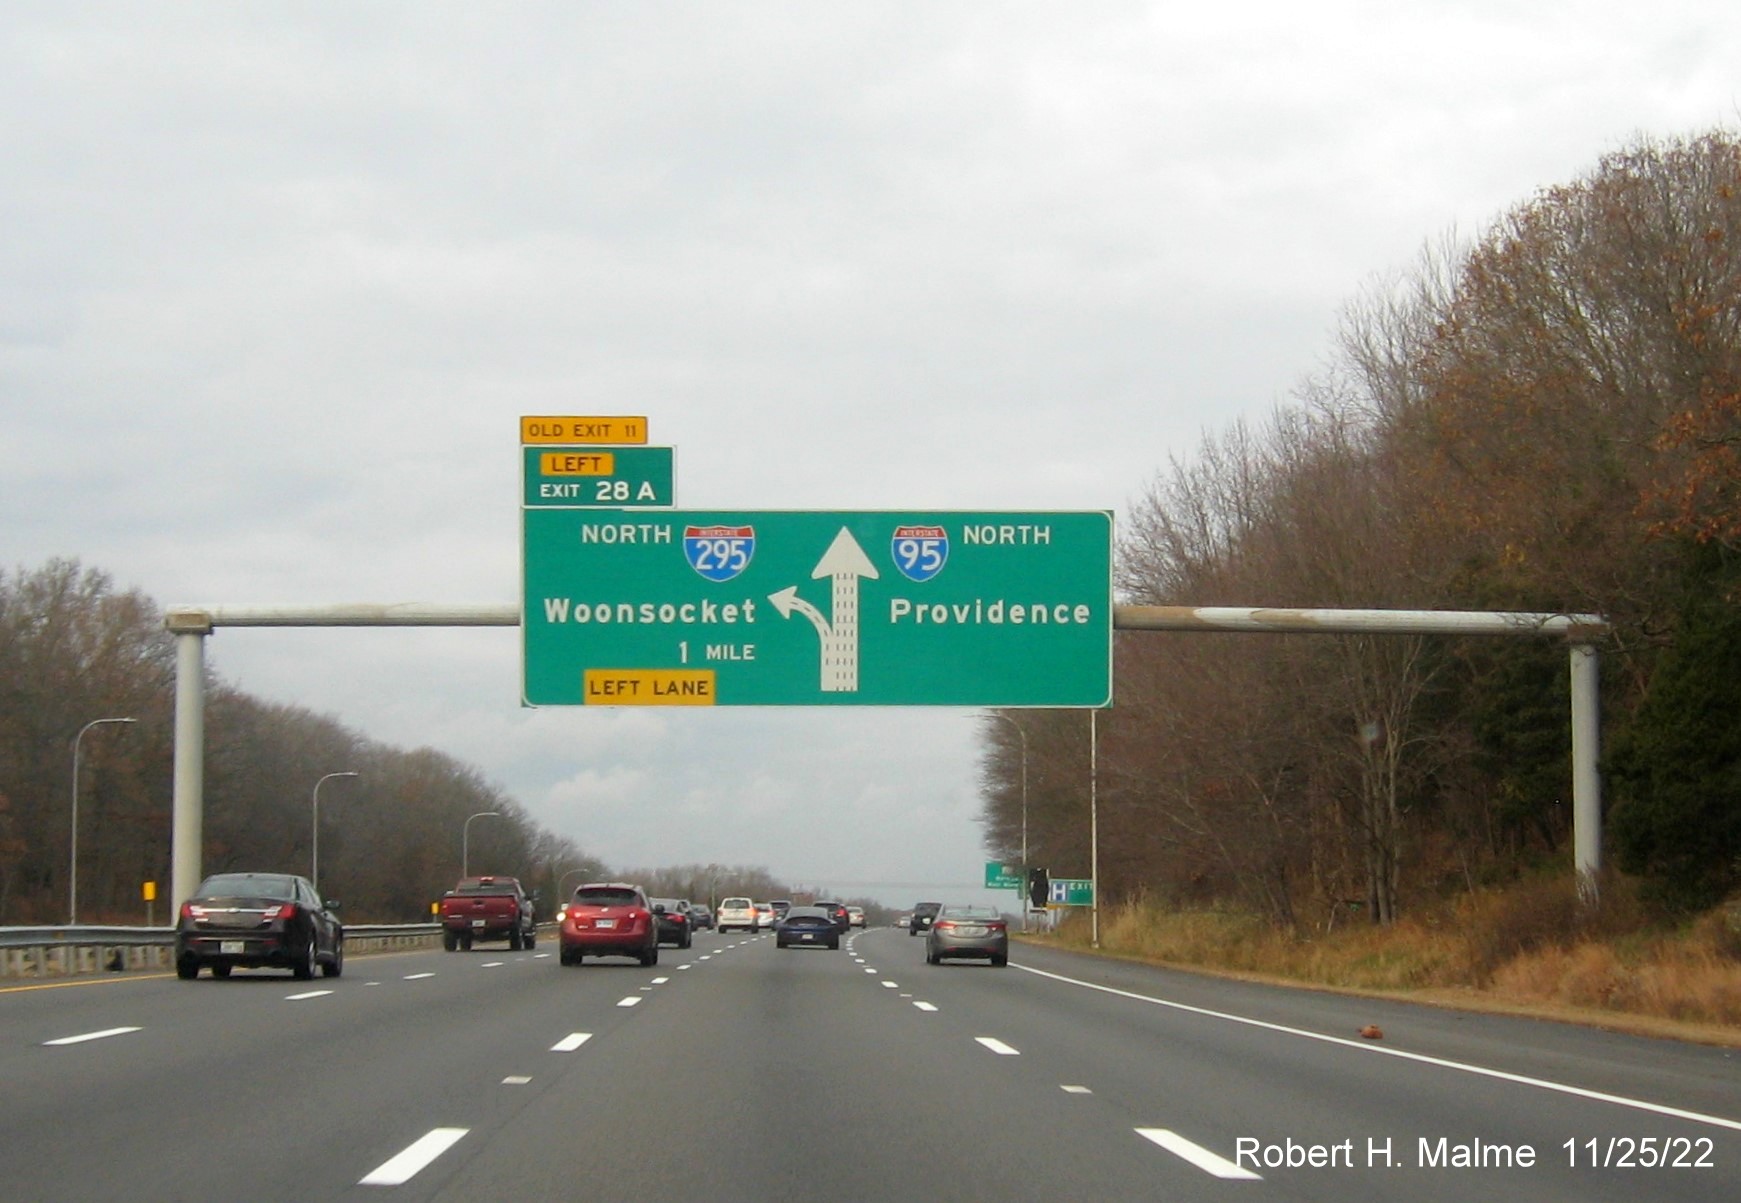 Image of 1 mile advance diagrammatic advance sign for North I-295 exit with new milepost based exit number and yellow Old Exit 11 sign on top of exit tab on I-95 North in Warwick, November 2022